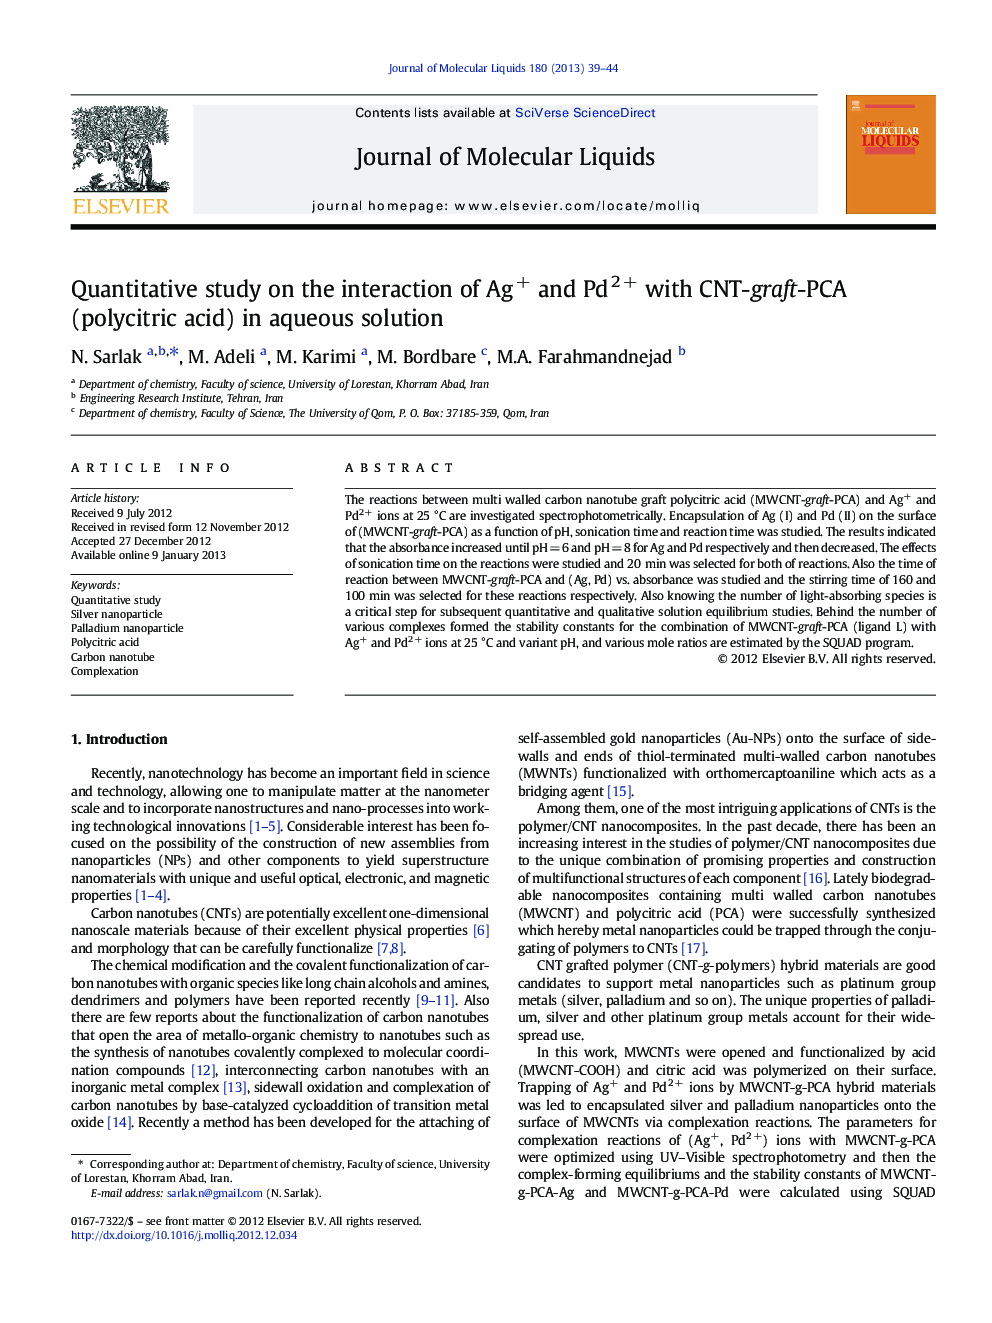 Quantitative study on the interaction of Ag+ and Pd2Â + with CNT-graft-PCA (polycitric acid) in aqueous solution